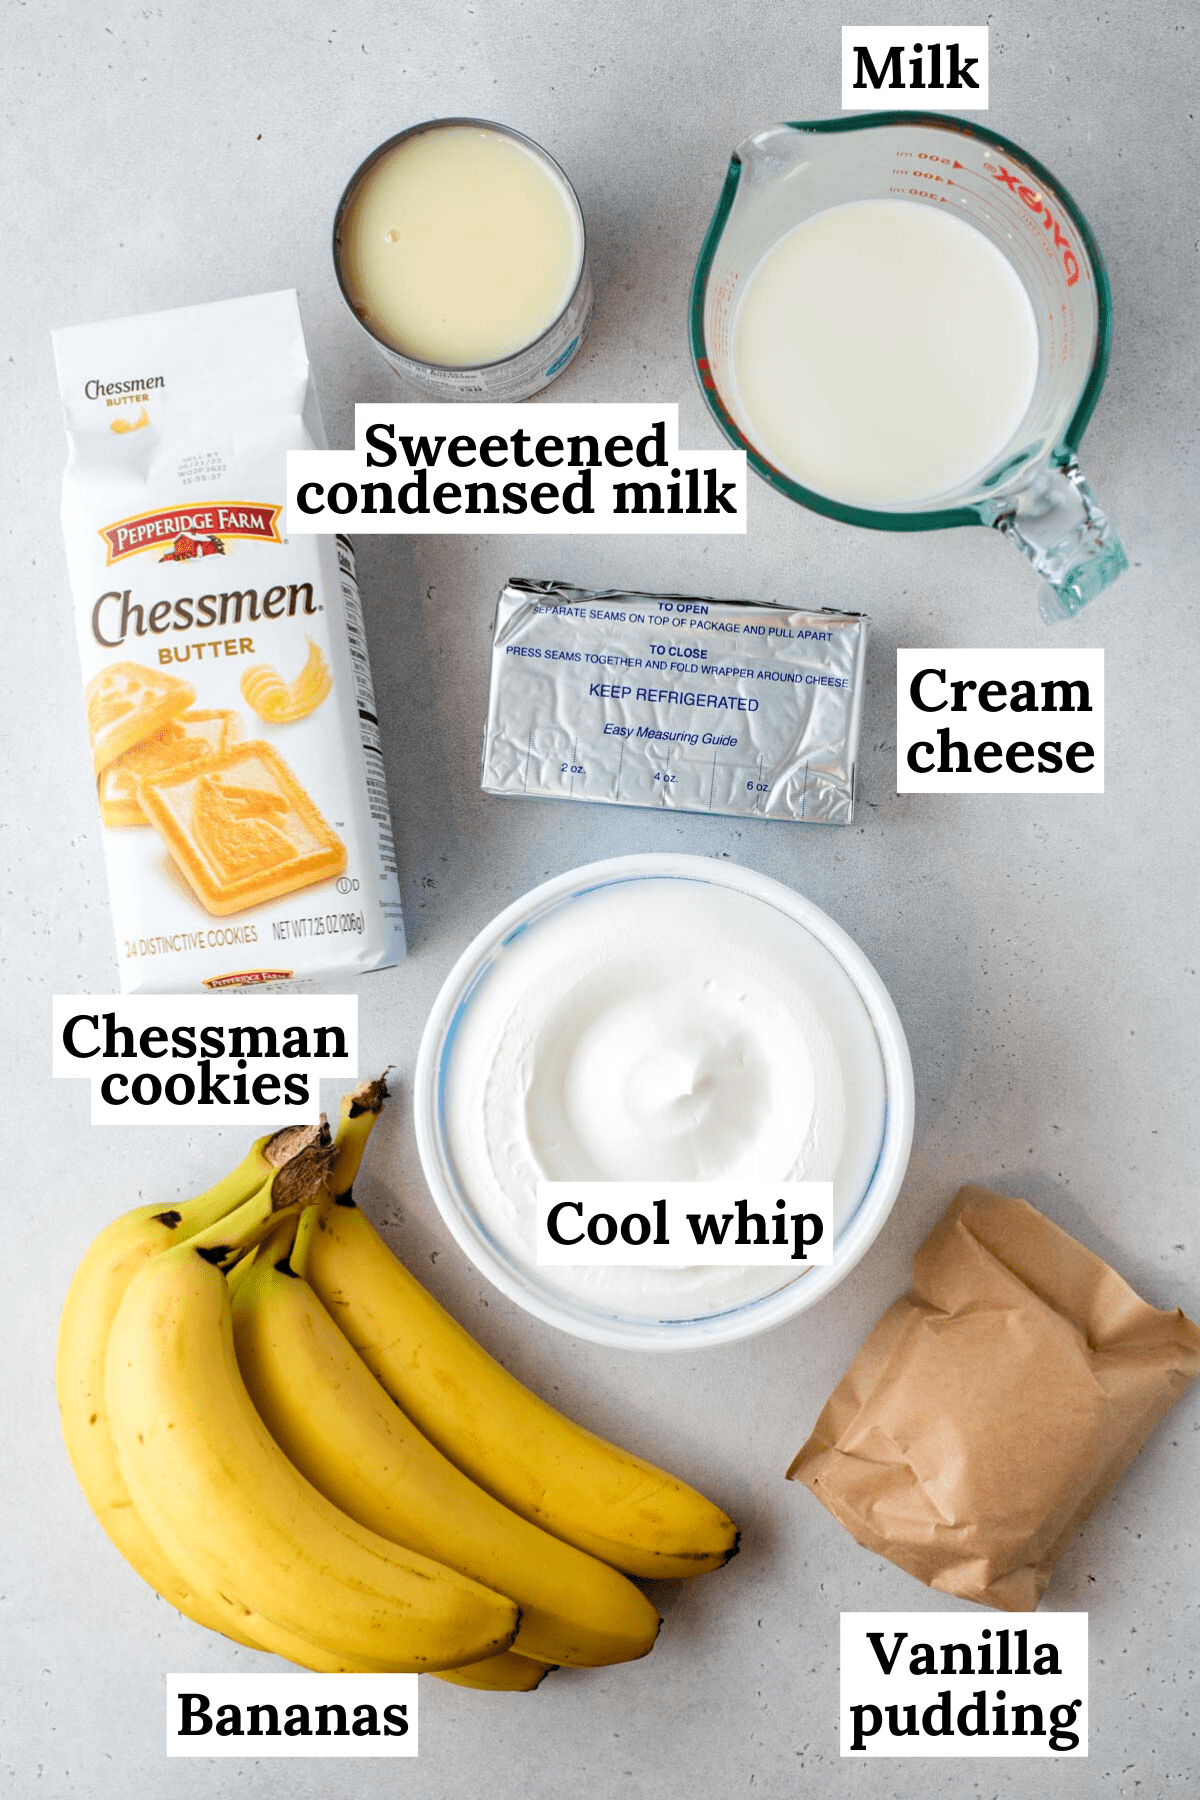 ingredients for banana pudding arranged on a white counter including chessman cookies, cool whip, vanilla pudding mix, bananas, milk, sweetened condensed milk and cream cheese